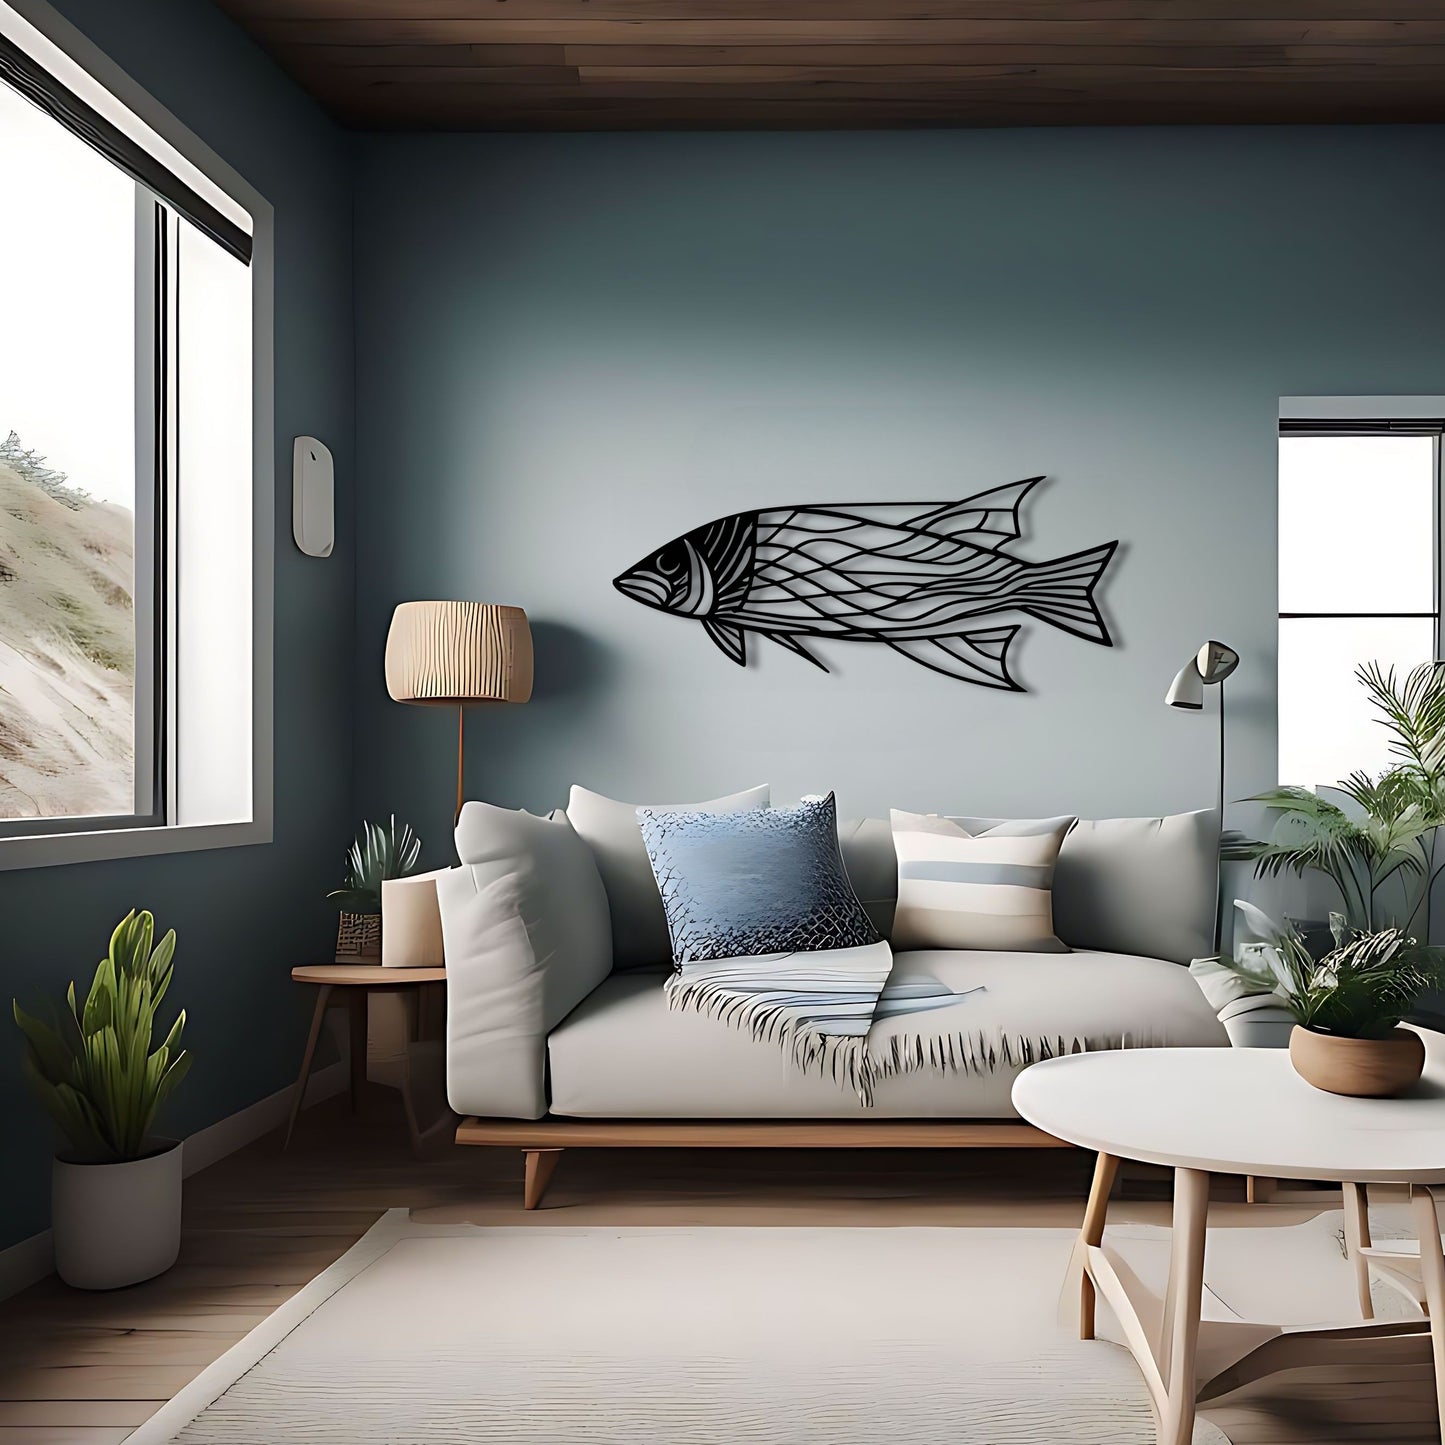 Minimalist Fish Line Art Metal Wall Art for Ocean and Fishing Enthusiasts